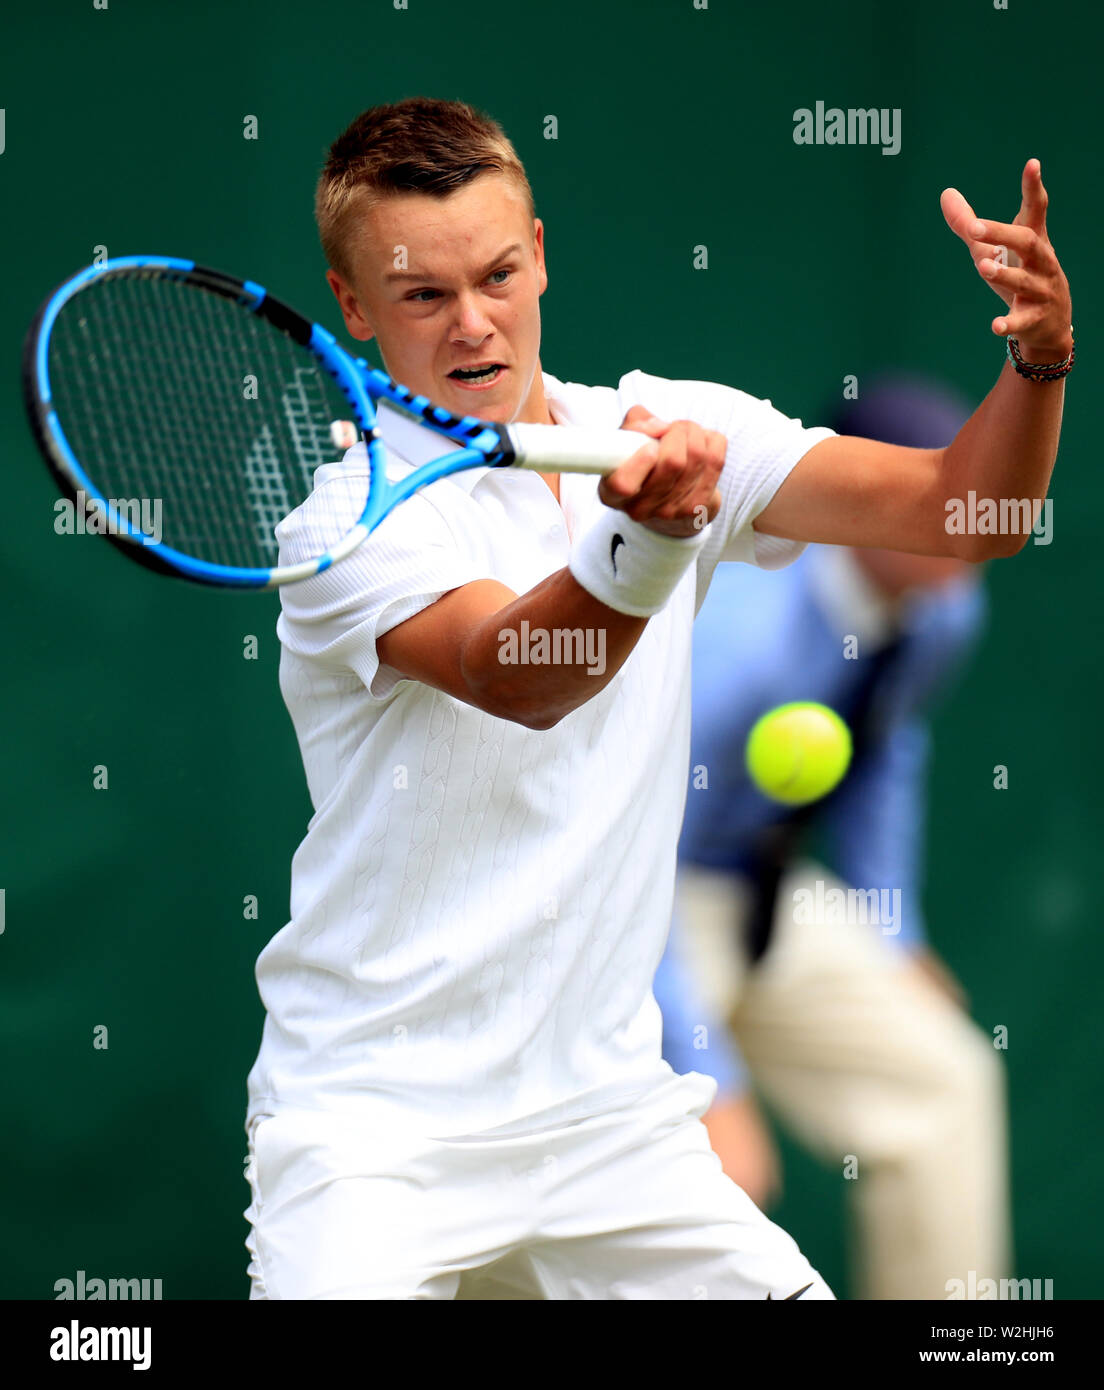 Holger Vitus Nodskov Rune During The Boys Singles On Day Eight Of The Wimbledon Championships At The All England Lawn Tennis And Croquet Club Wimbledon Stock Photo Alamy